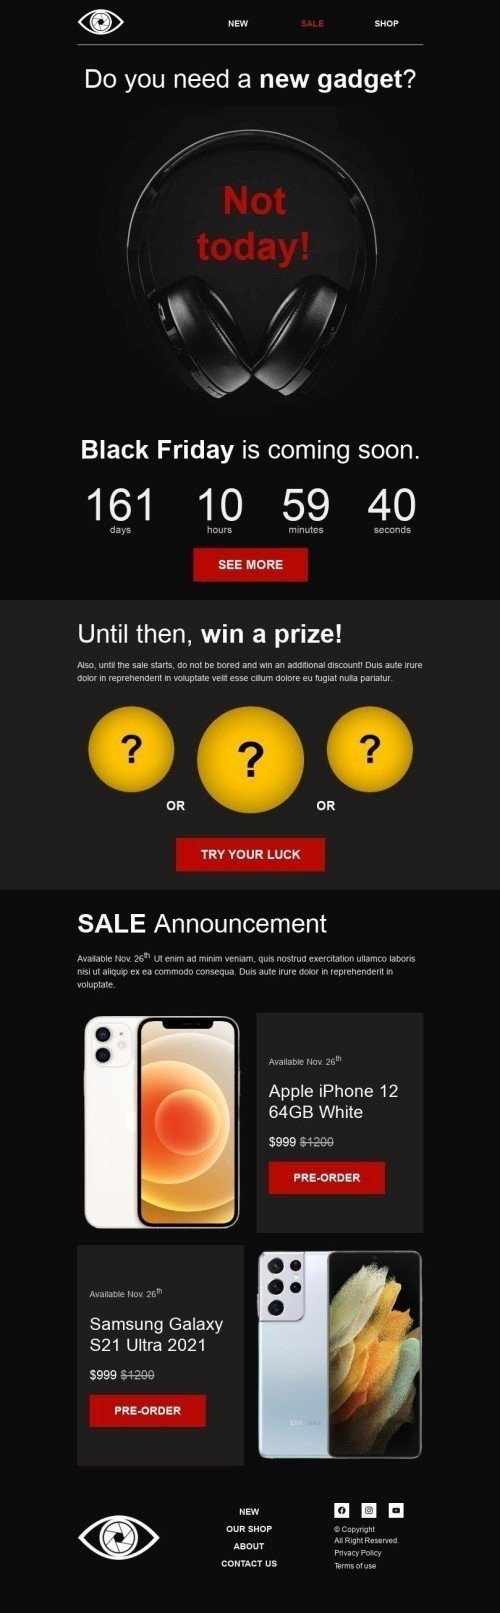 Black Friday Email Template "Win a prize" for Gadgets industry mobile view